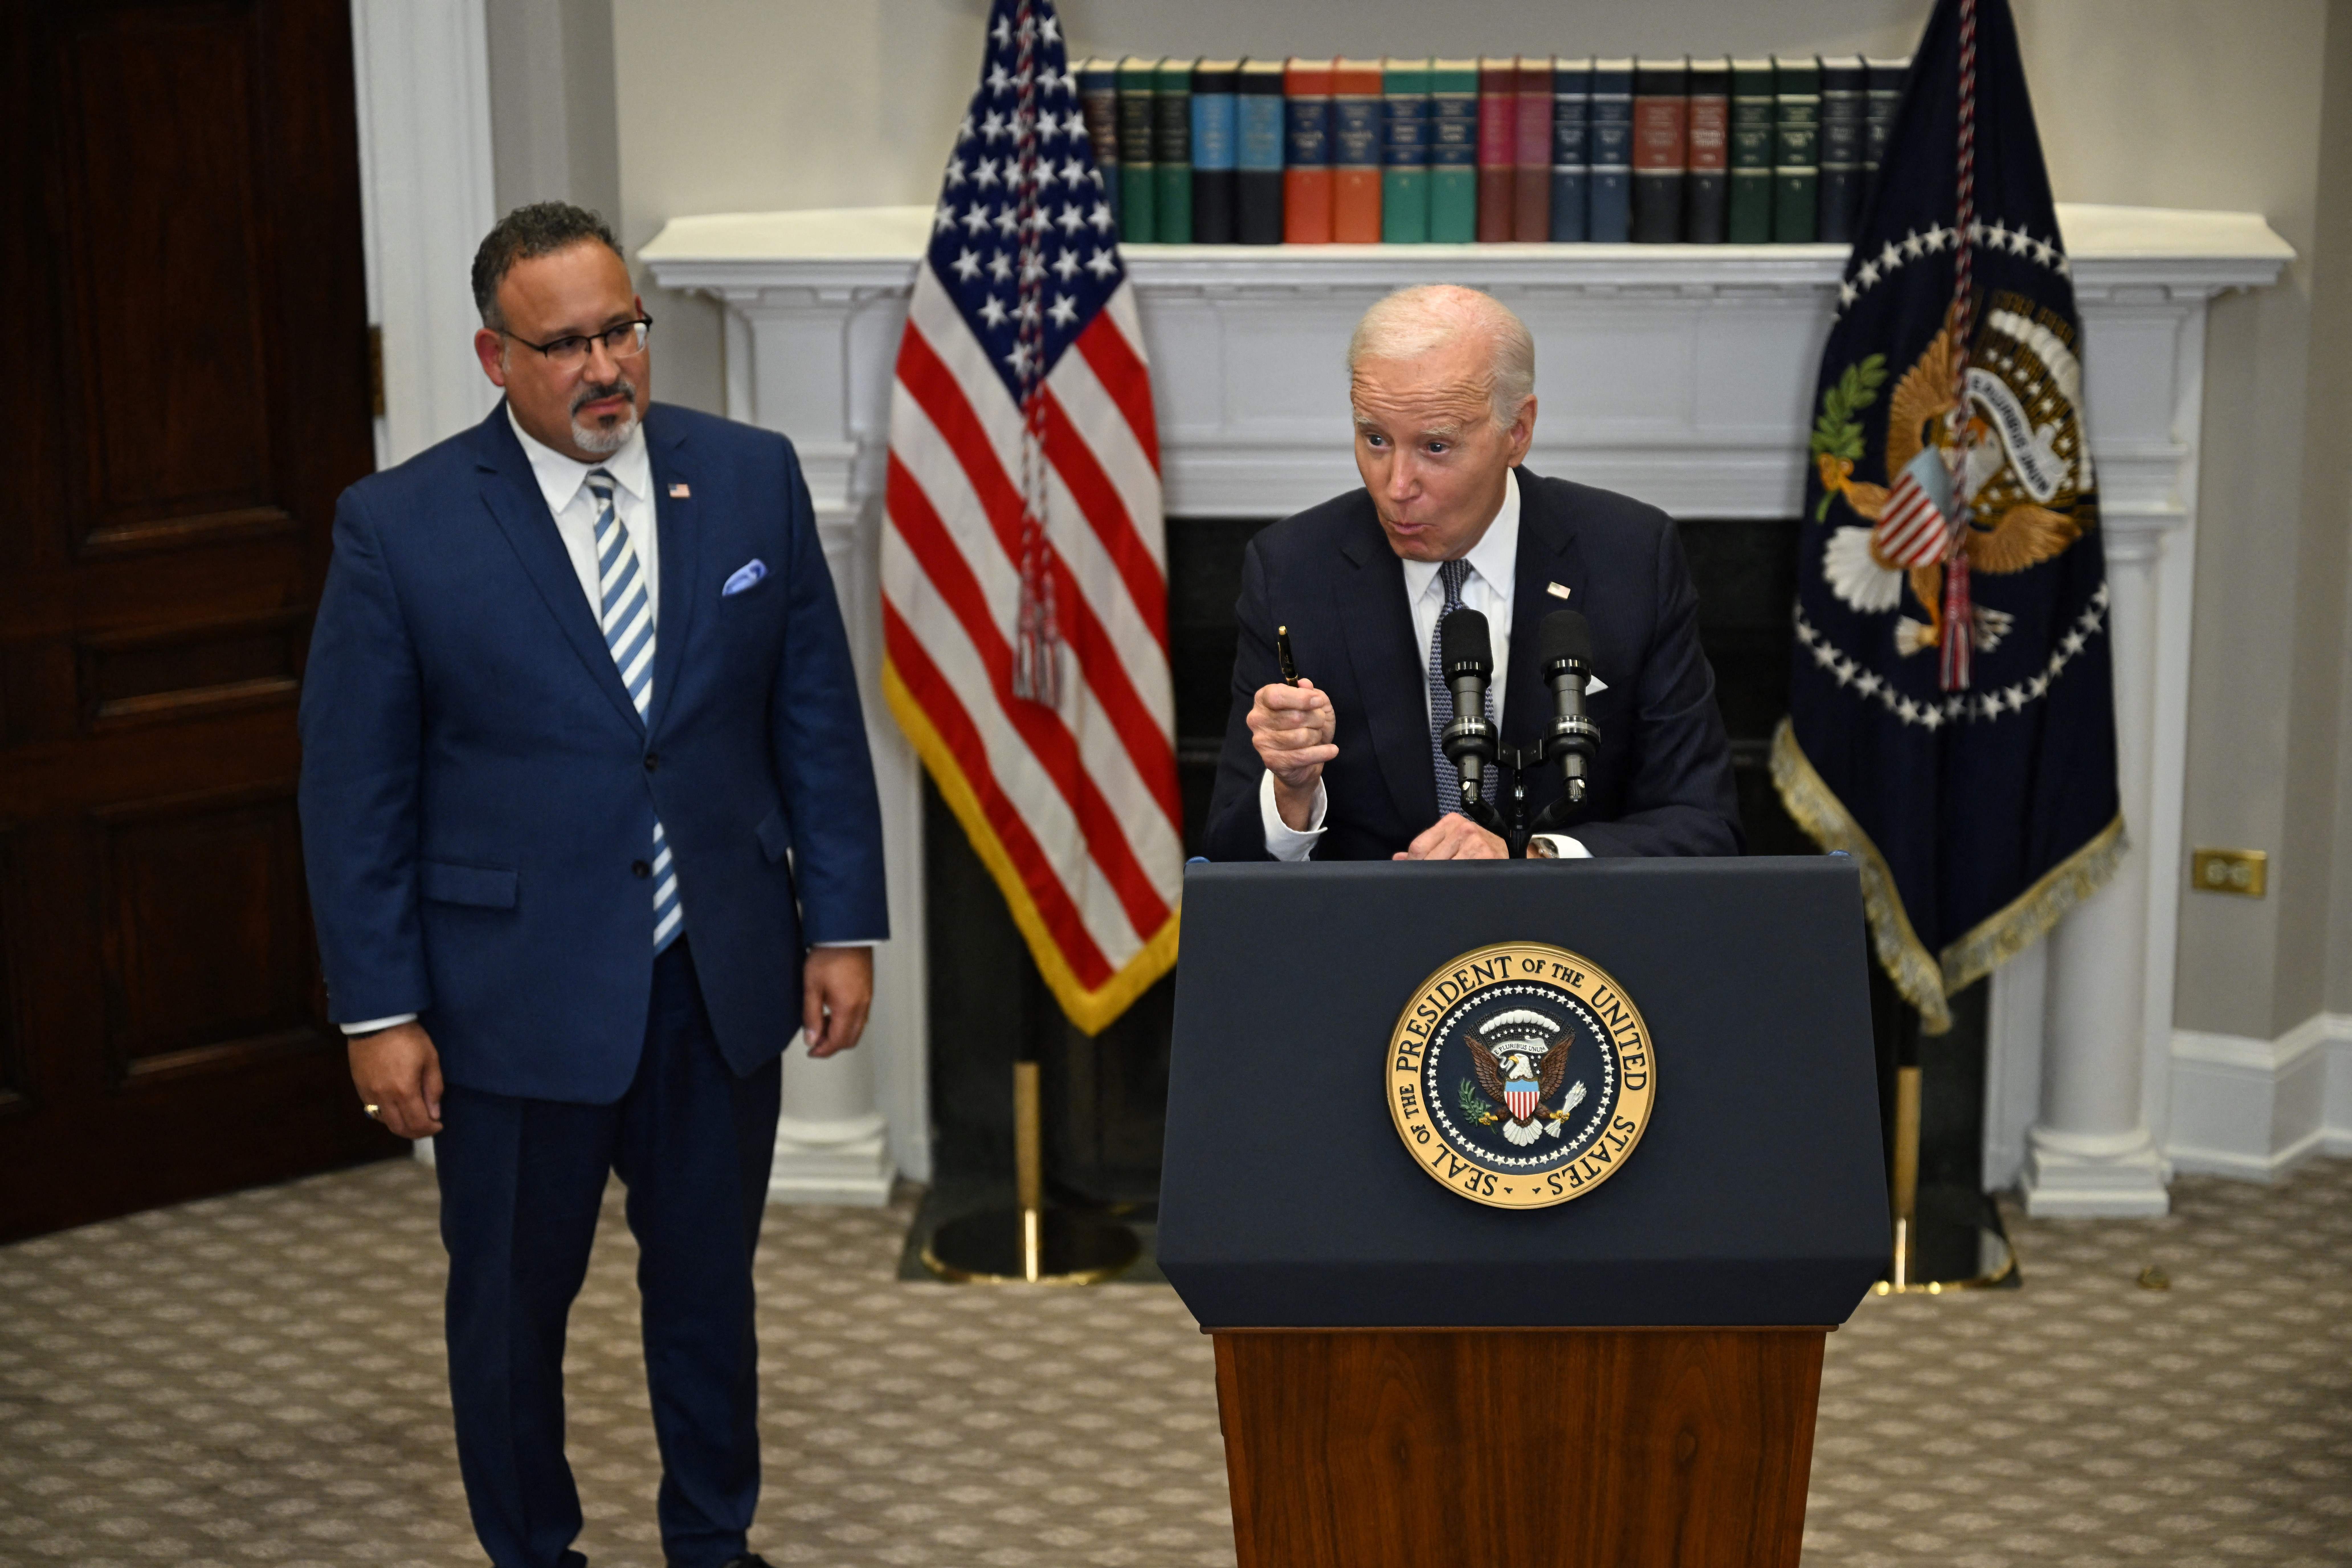 US President Joe Biden speaks about the US Supreme Court's decision overruling student debt forgiveness as Education Secretary Miguel Cardona looks on in the Roosevelt Room of the White House in Washington, DC, on June 30, 2023. The court said Biden had overstepped his powers in cancelling more than $400 billion in debt, in an effort to alleviate the financial burden of education that hangs over many Americans decades after they finished their studies. (Photo by Jim WATSON / AFP) (Photo by JIM WATSON/AFP via Getty Images)